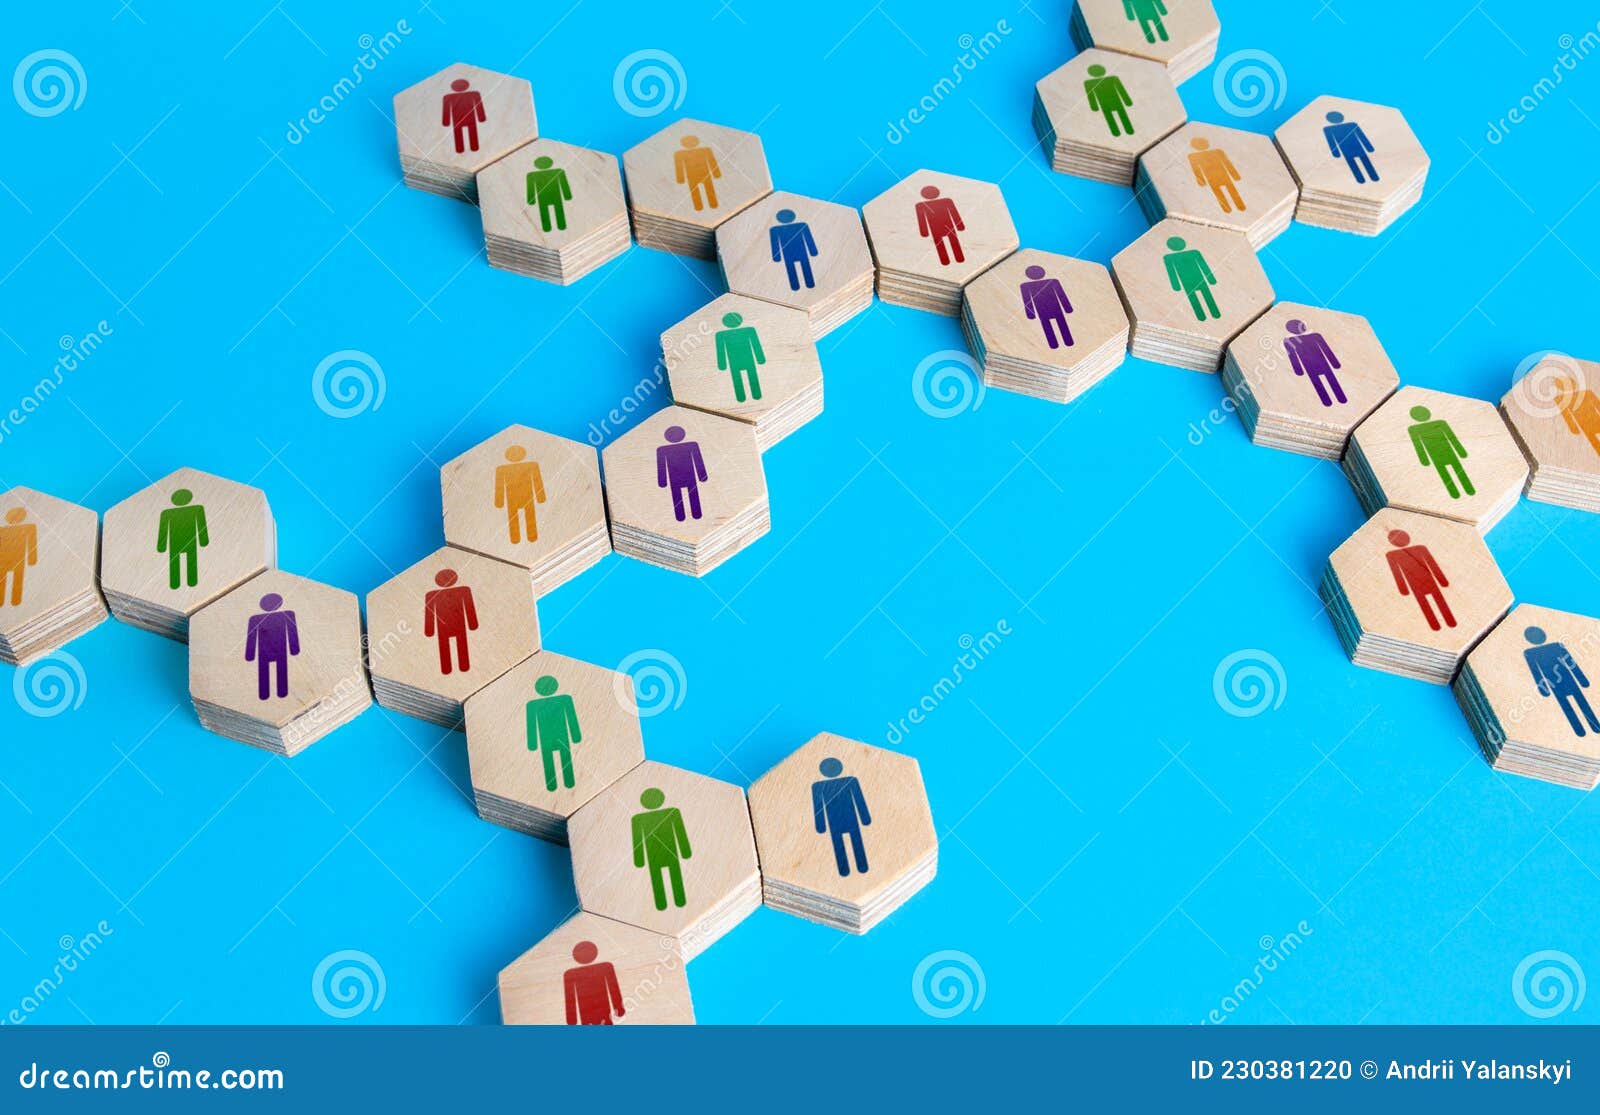 chain of communicating people. cooperation for solving tasks. unity and diversity. networking. multiculturalism. connecting